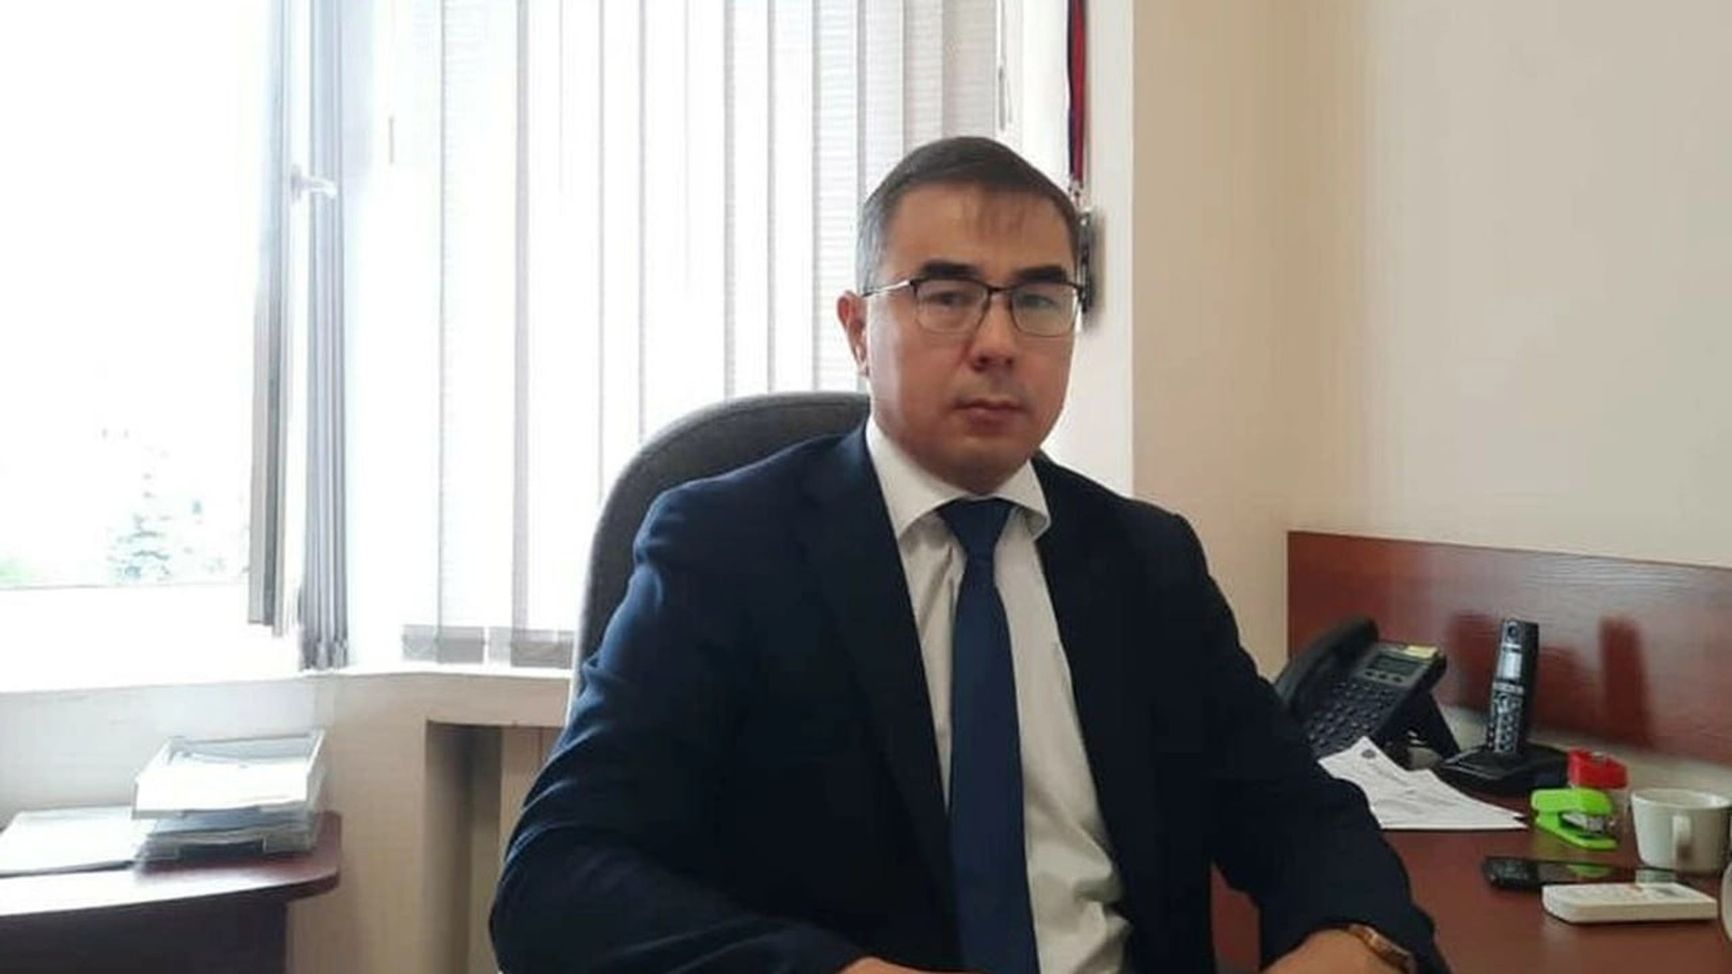 Manas Zholdoshbekov, an employee of the Embassy of Kyrgyzstan in Russia